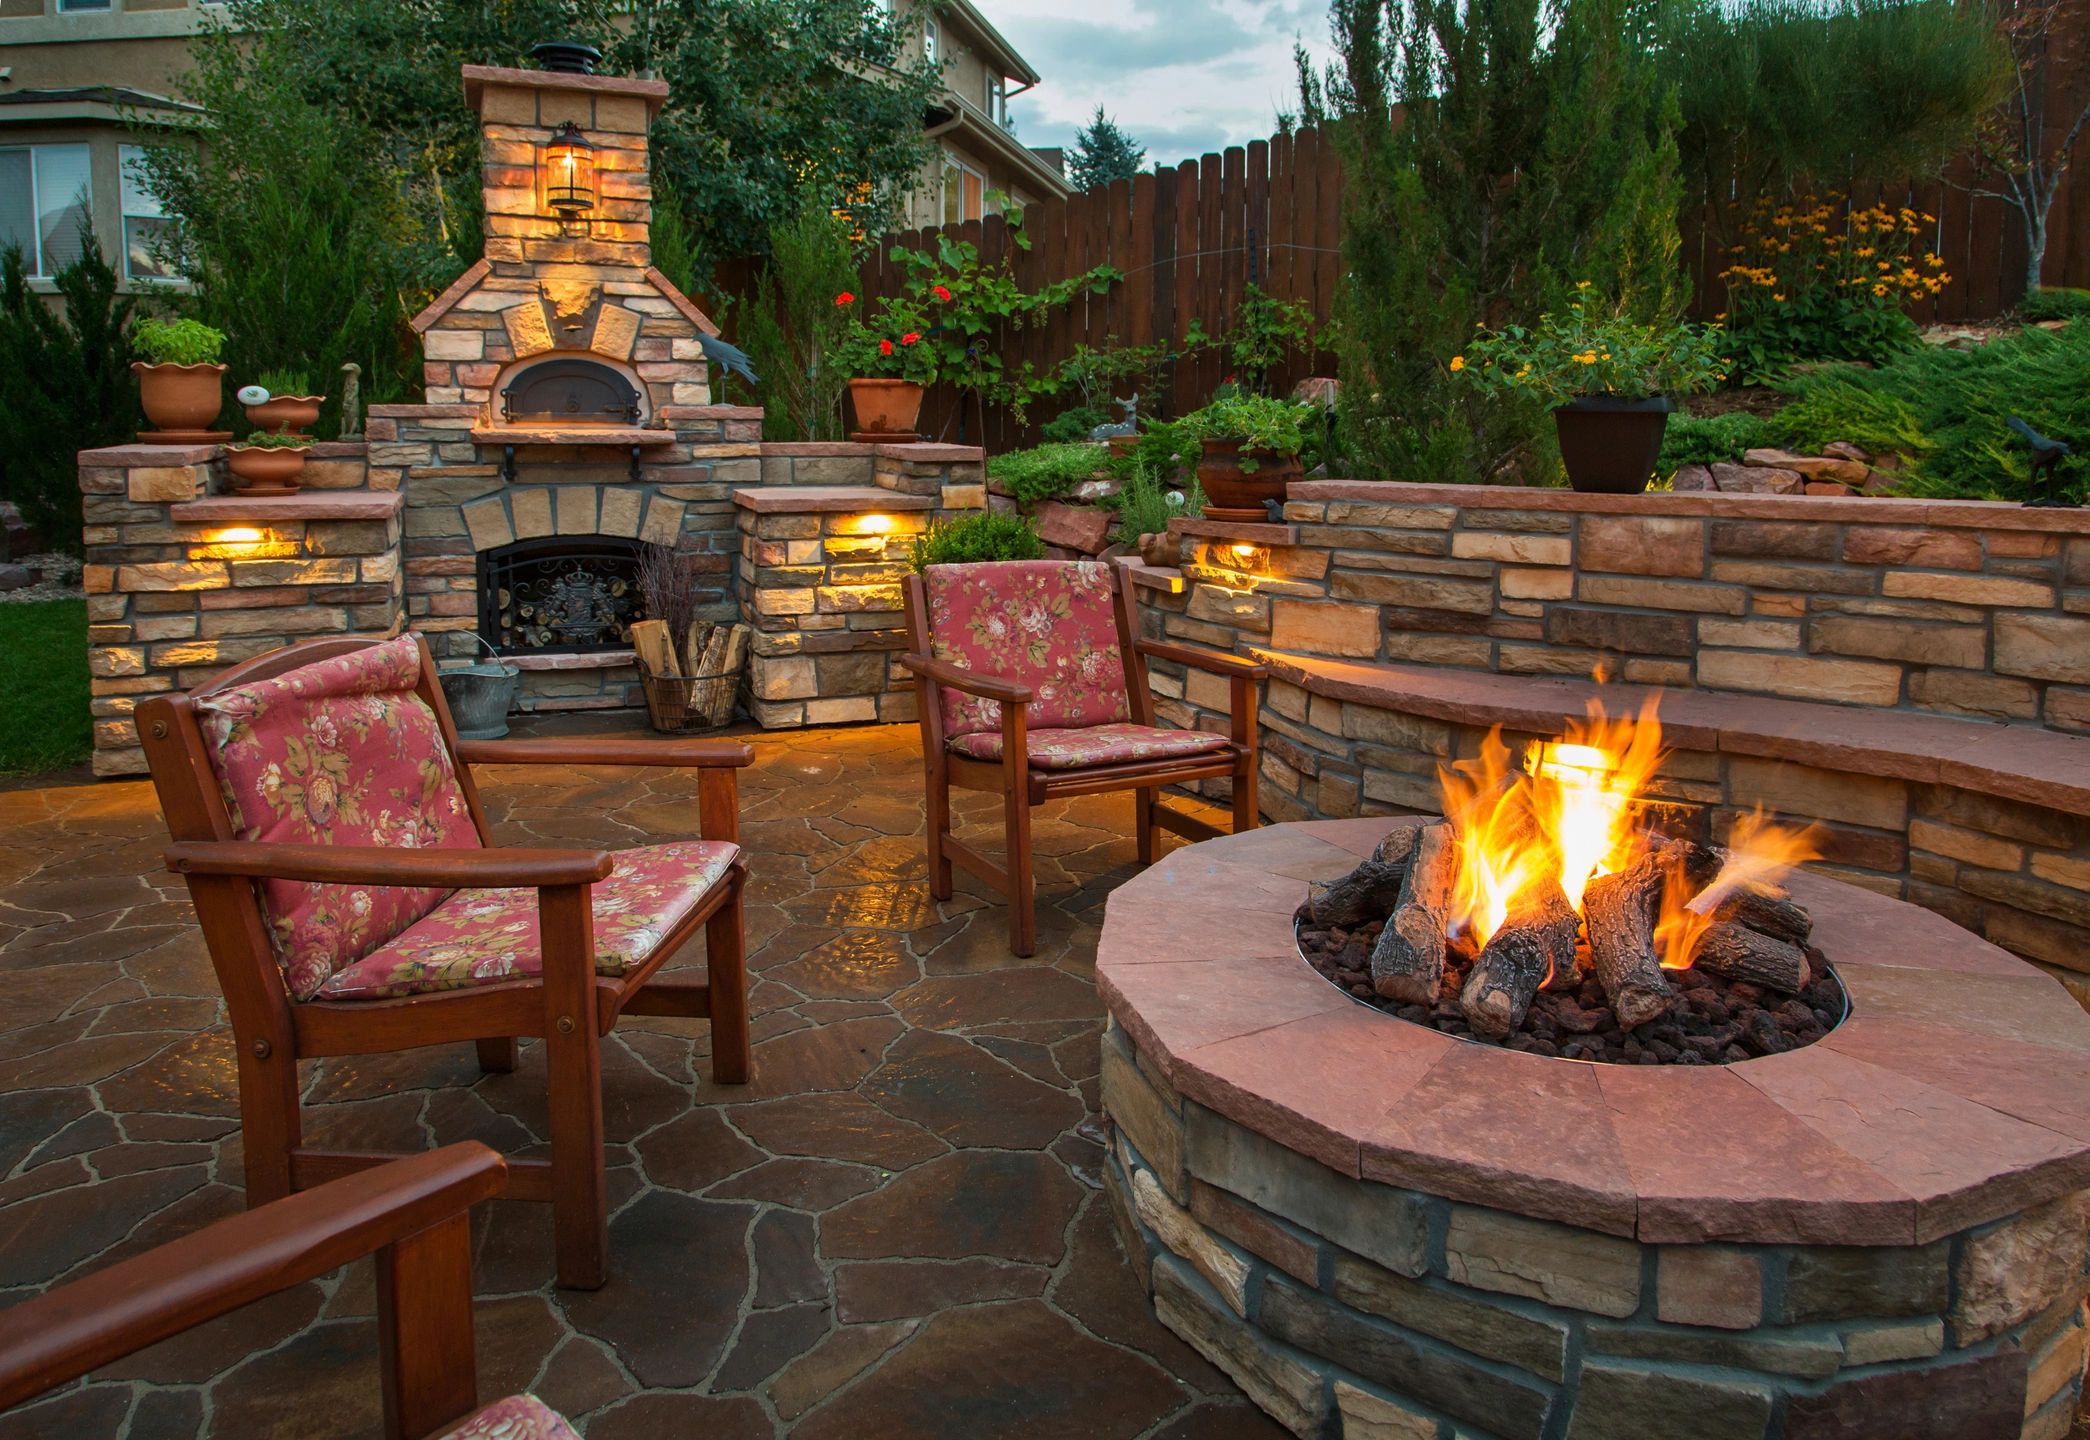 Fire pit and barbecue grill